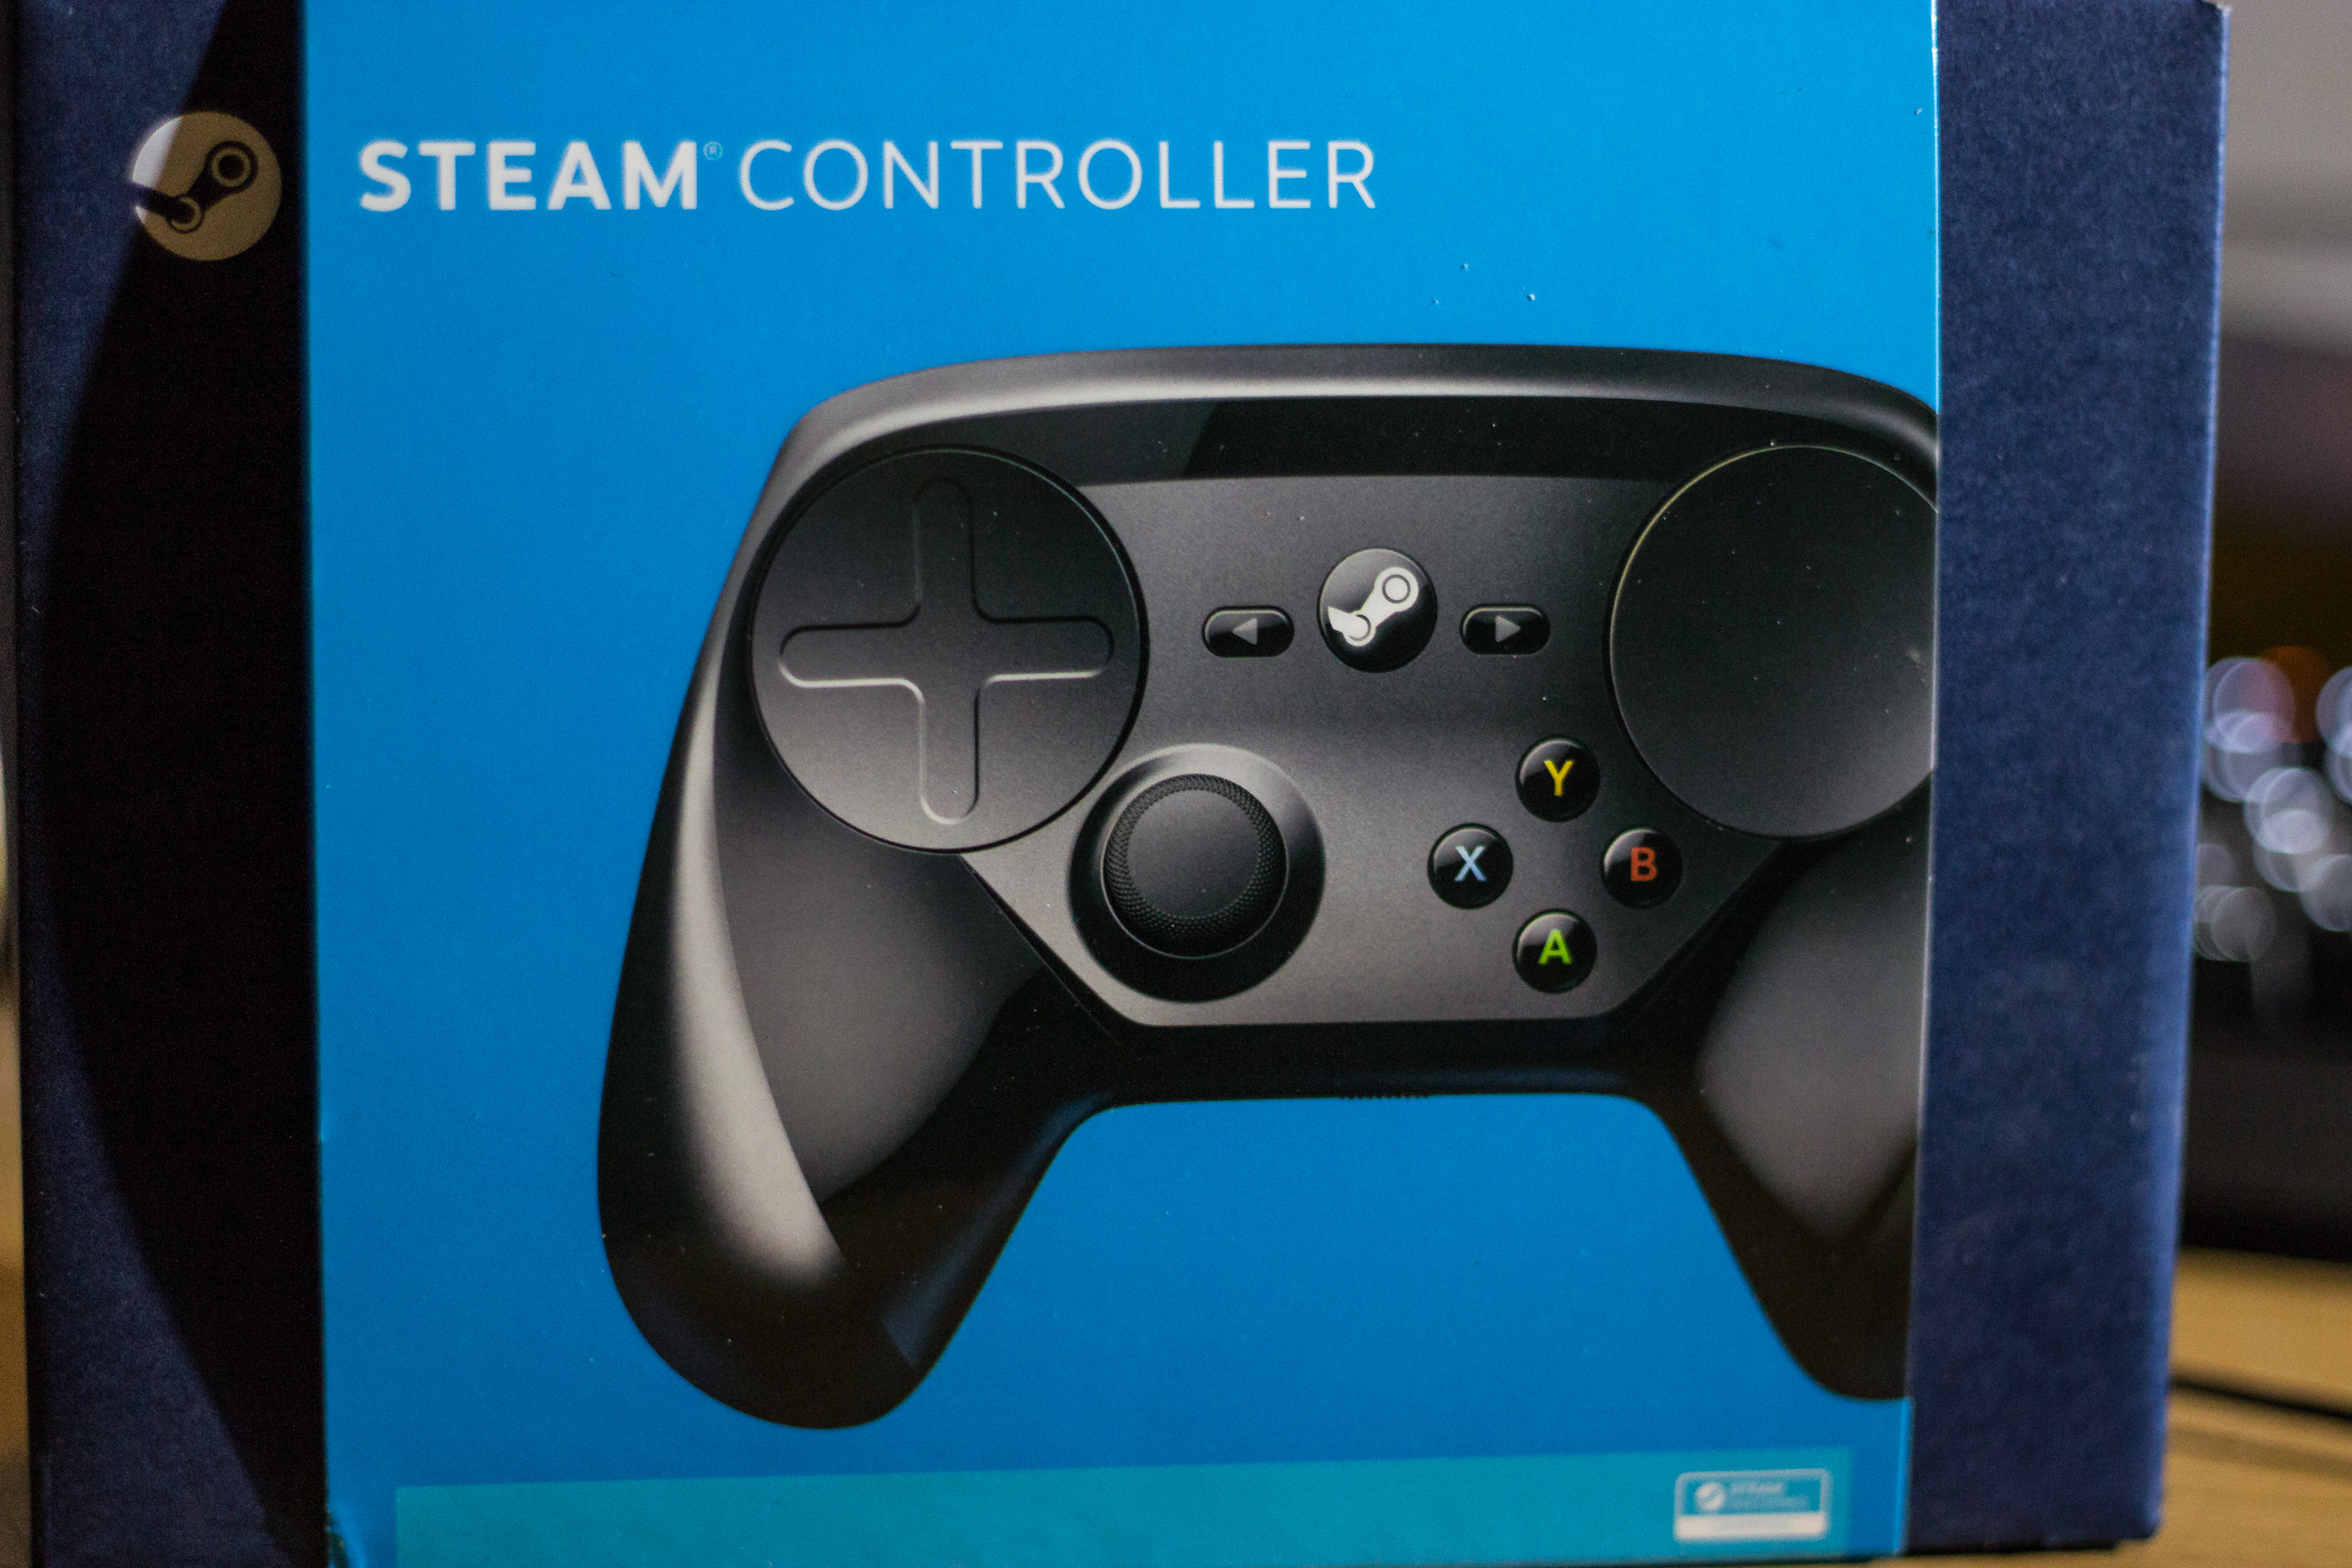 Steam Controller Perspective Of A Computer Science Student